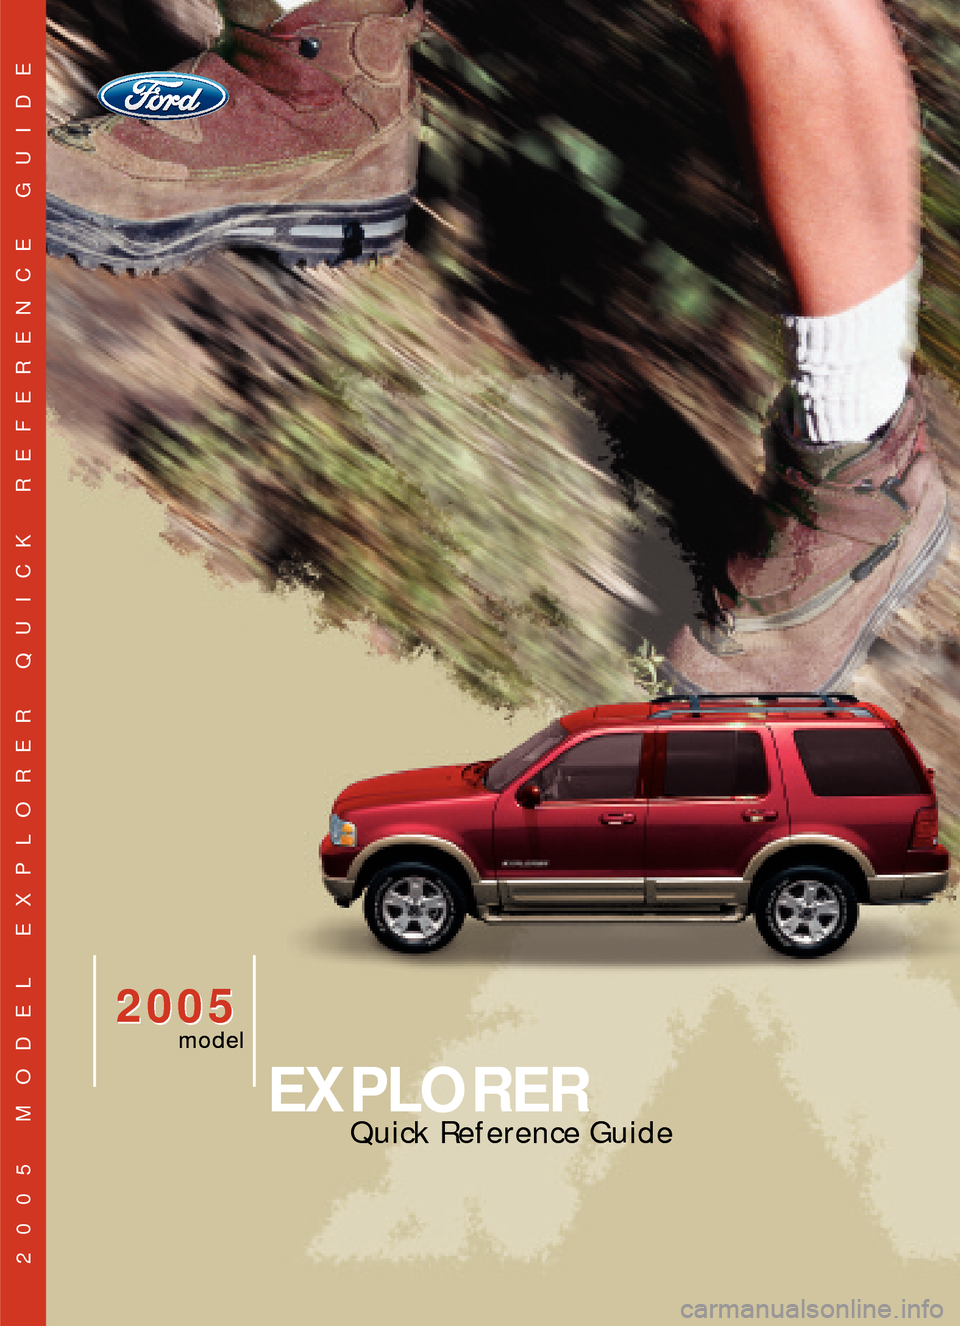 FORD EXPLORER 2005 3.G Quick Reference Guide EXPLORER
Quick Reference Guide
2005 2005model
2005 MODEL EXPLORER QUICK REFERENCE GUIDE 